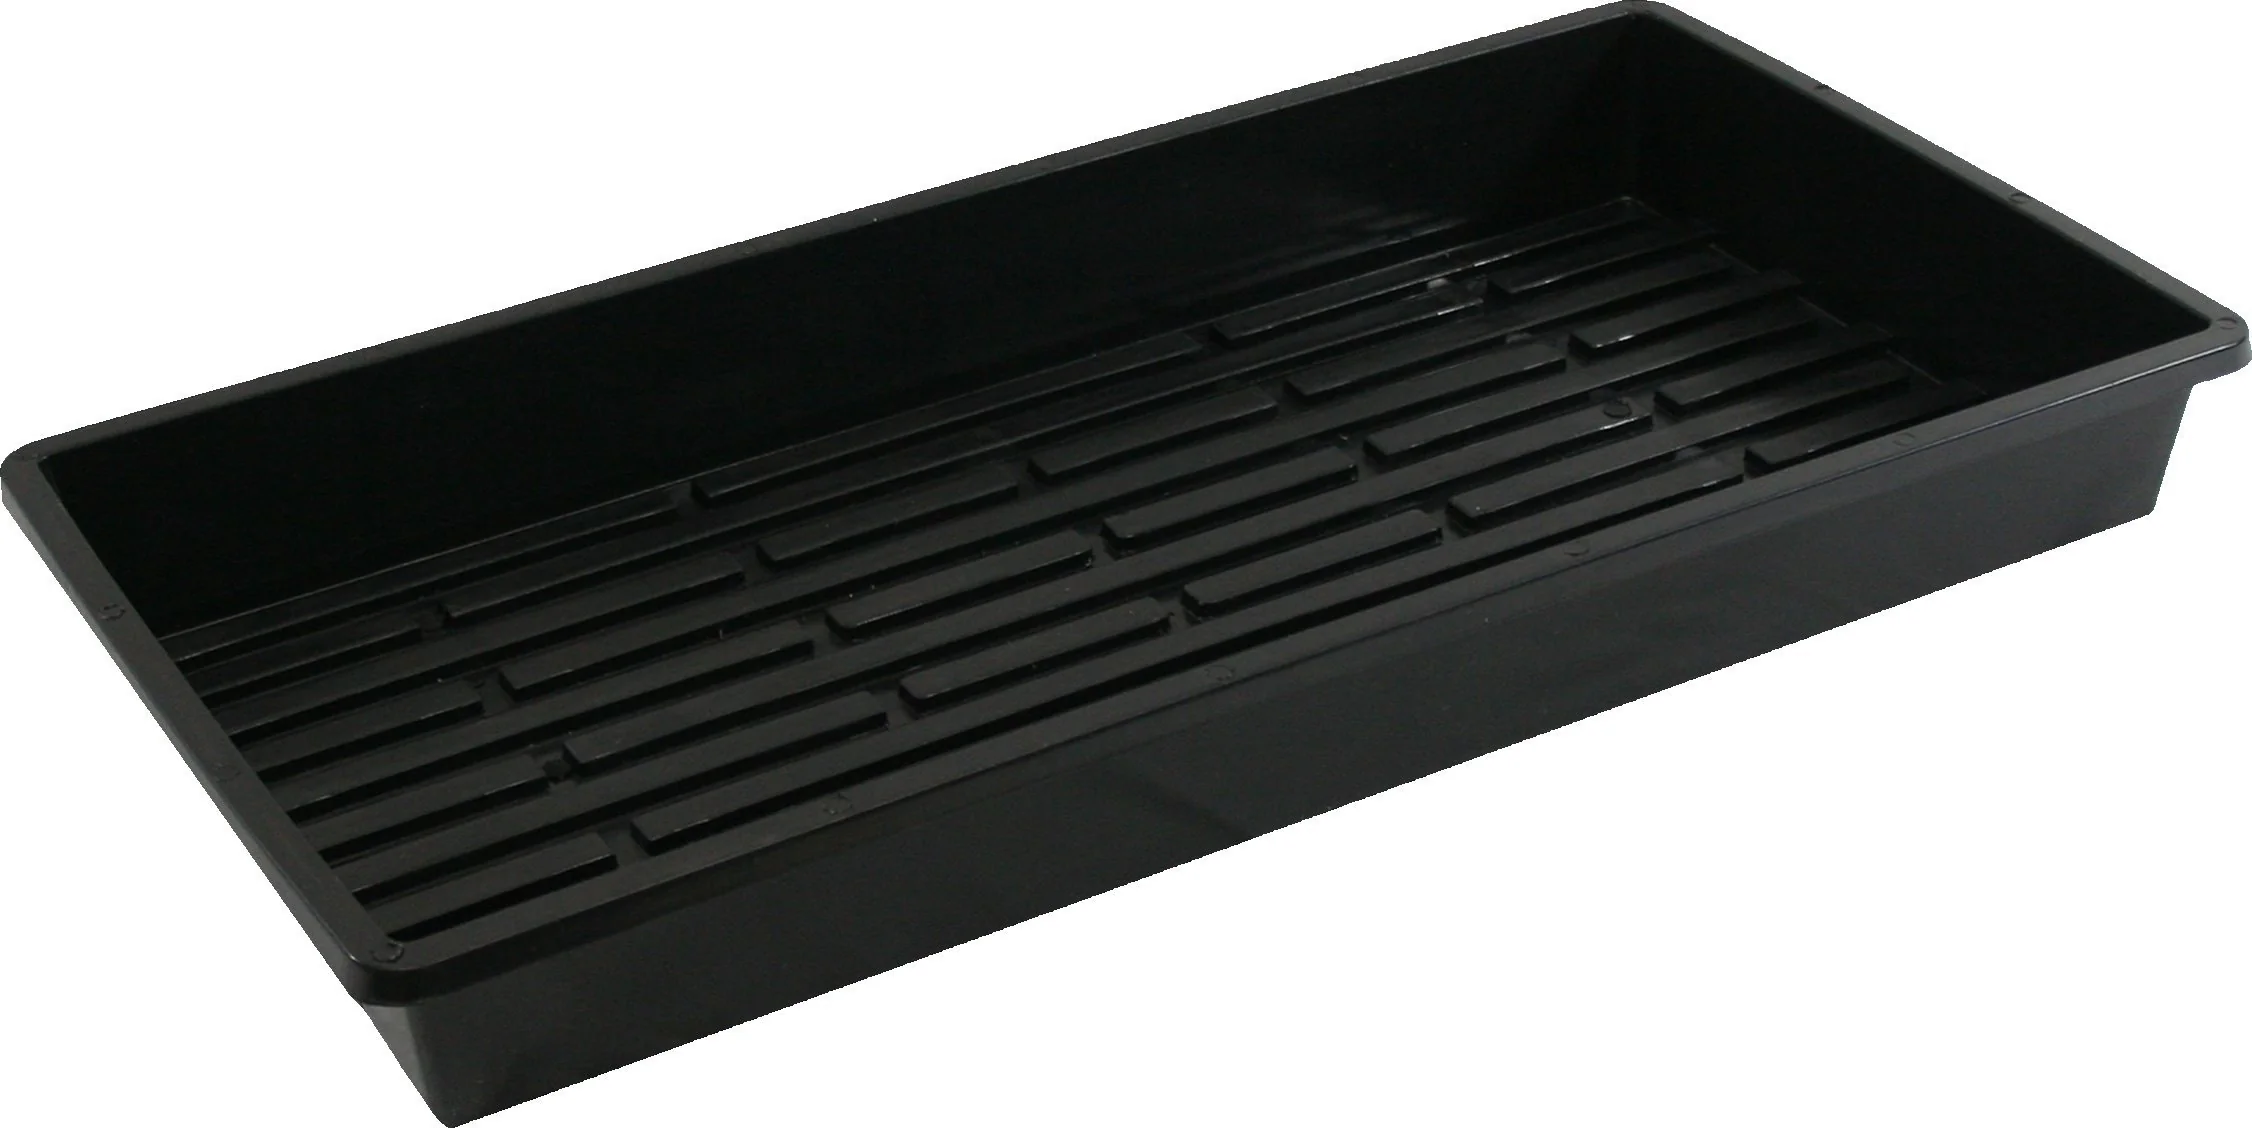 SunBlaster 1020 Quad Thick Tray Questions & Answers